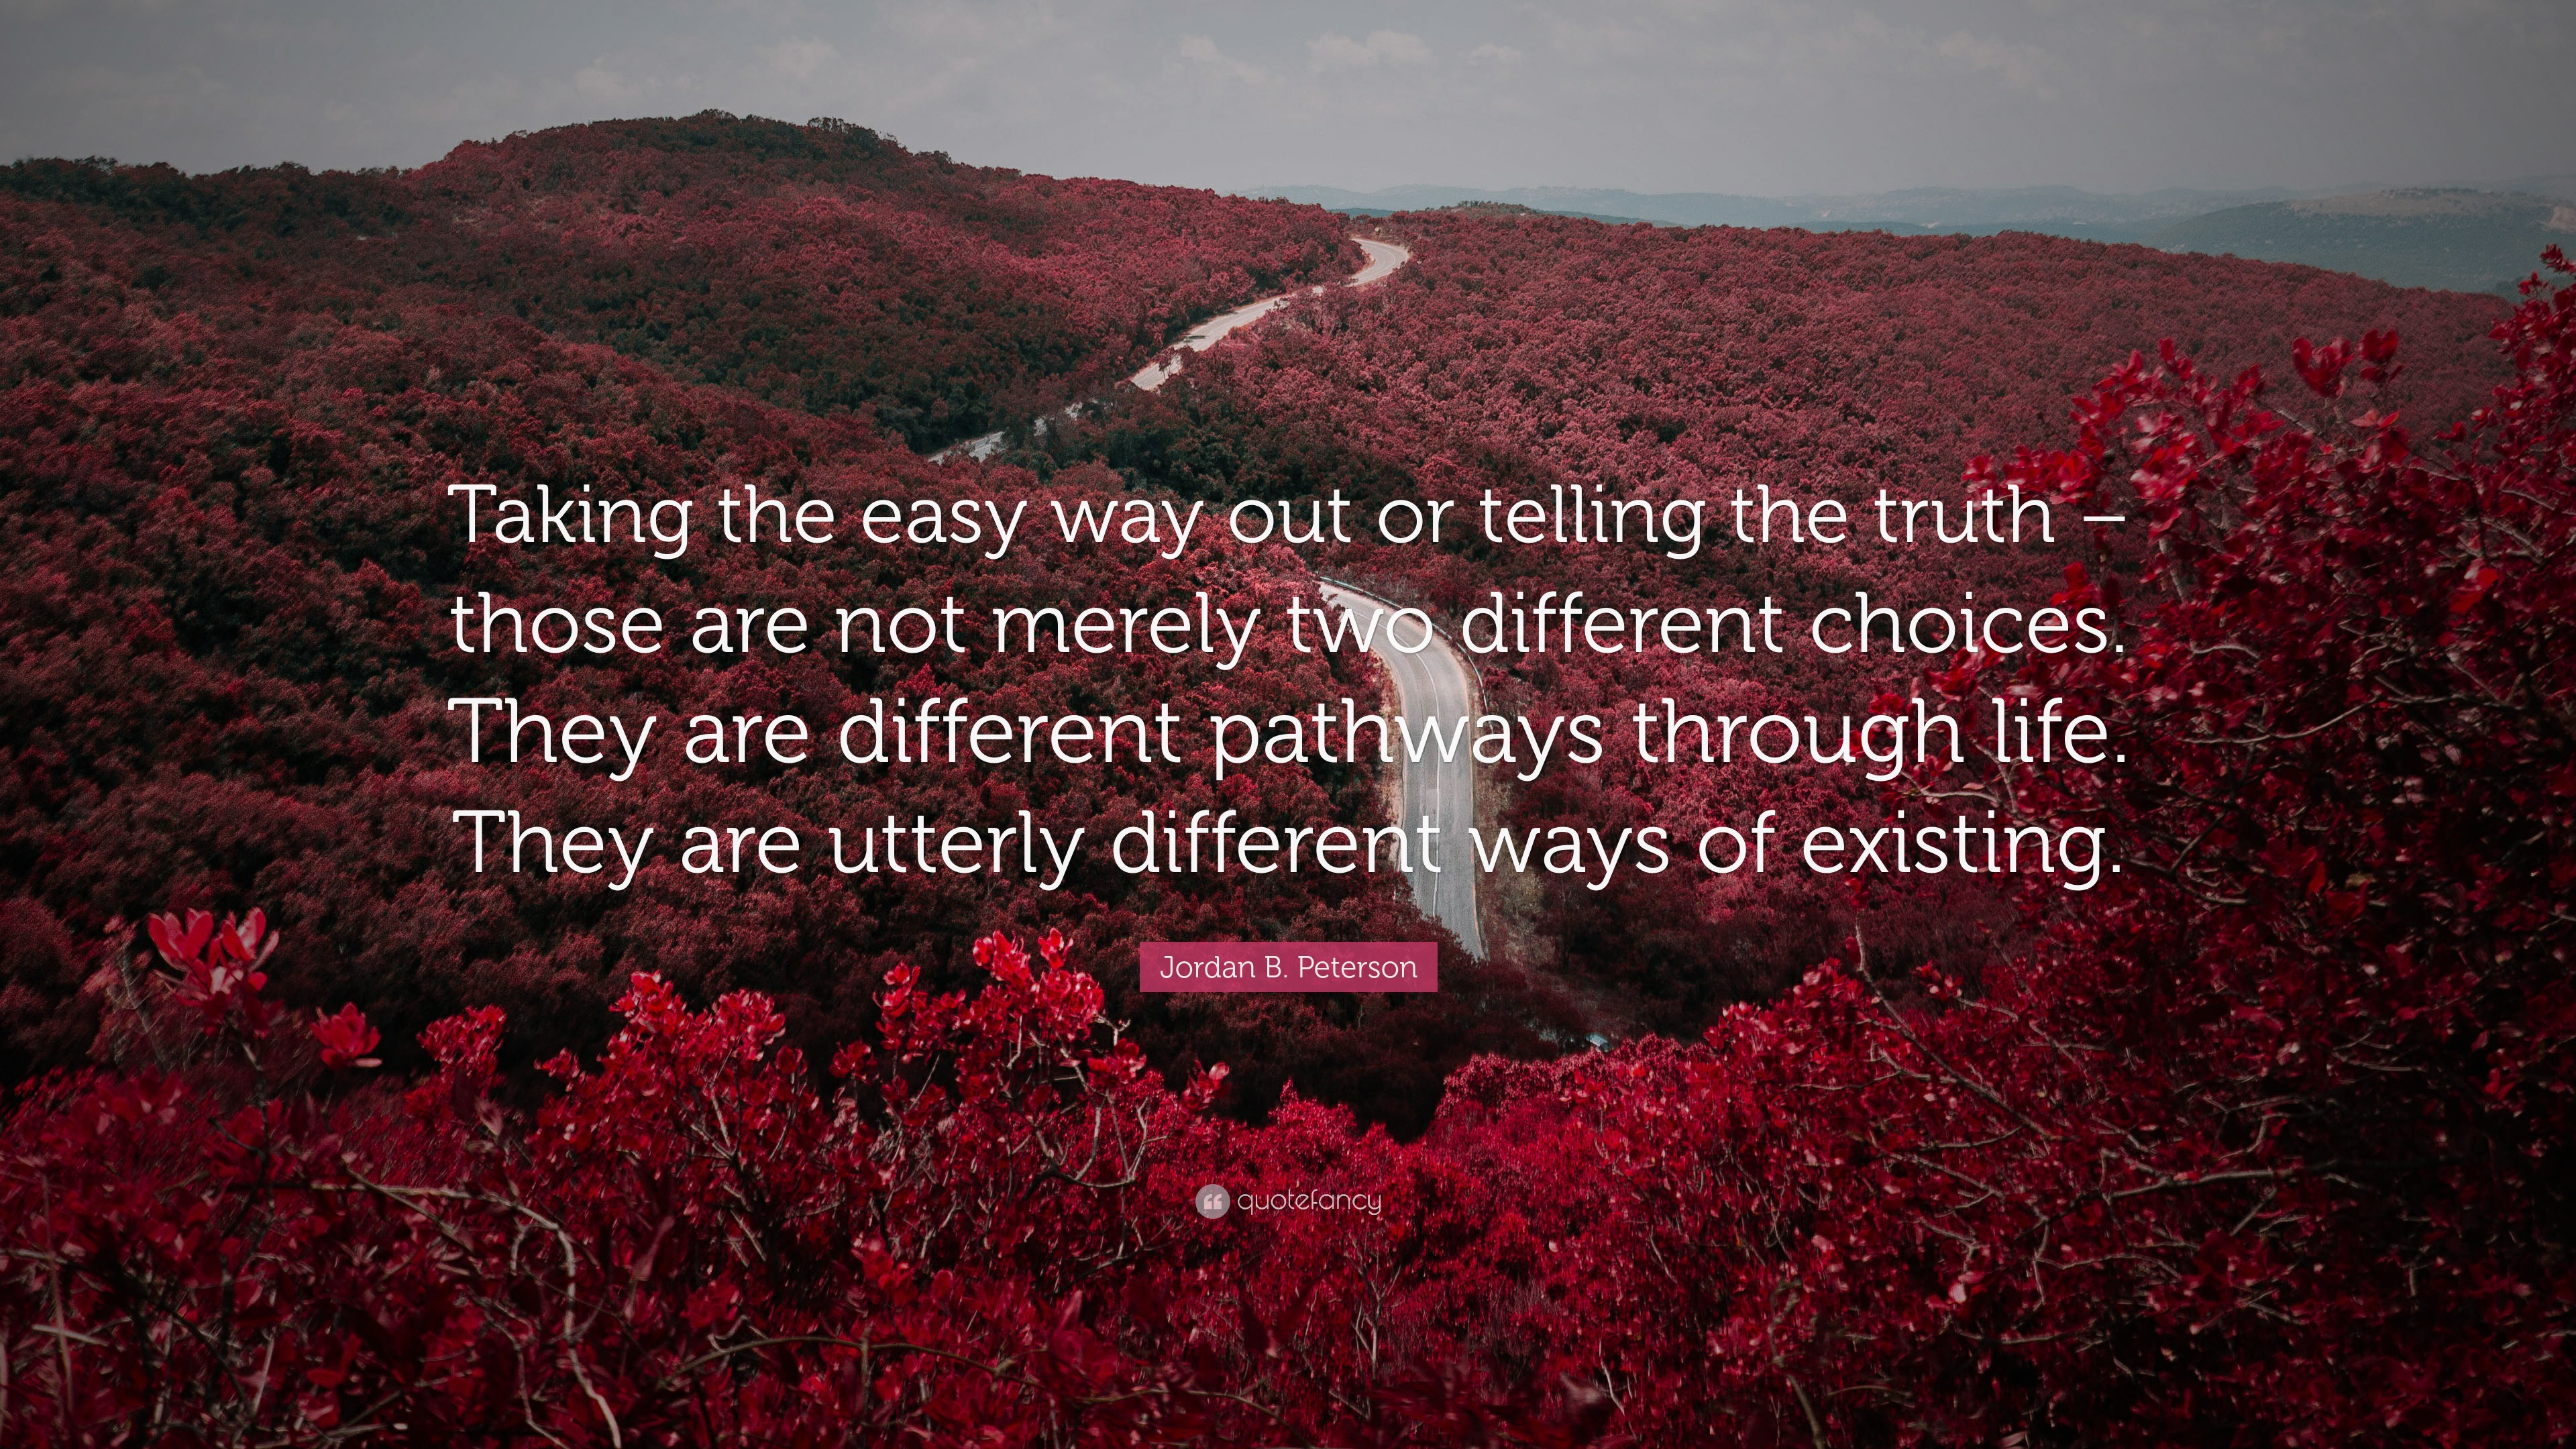 bestemt Mauve Håndværker Jordan B. Peterson Quote: “Taking the easy way out or telling the truth –  those are not merely two different choices. They are different pathways  t...”